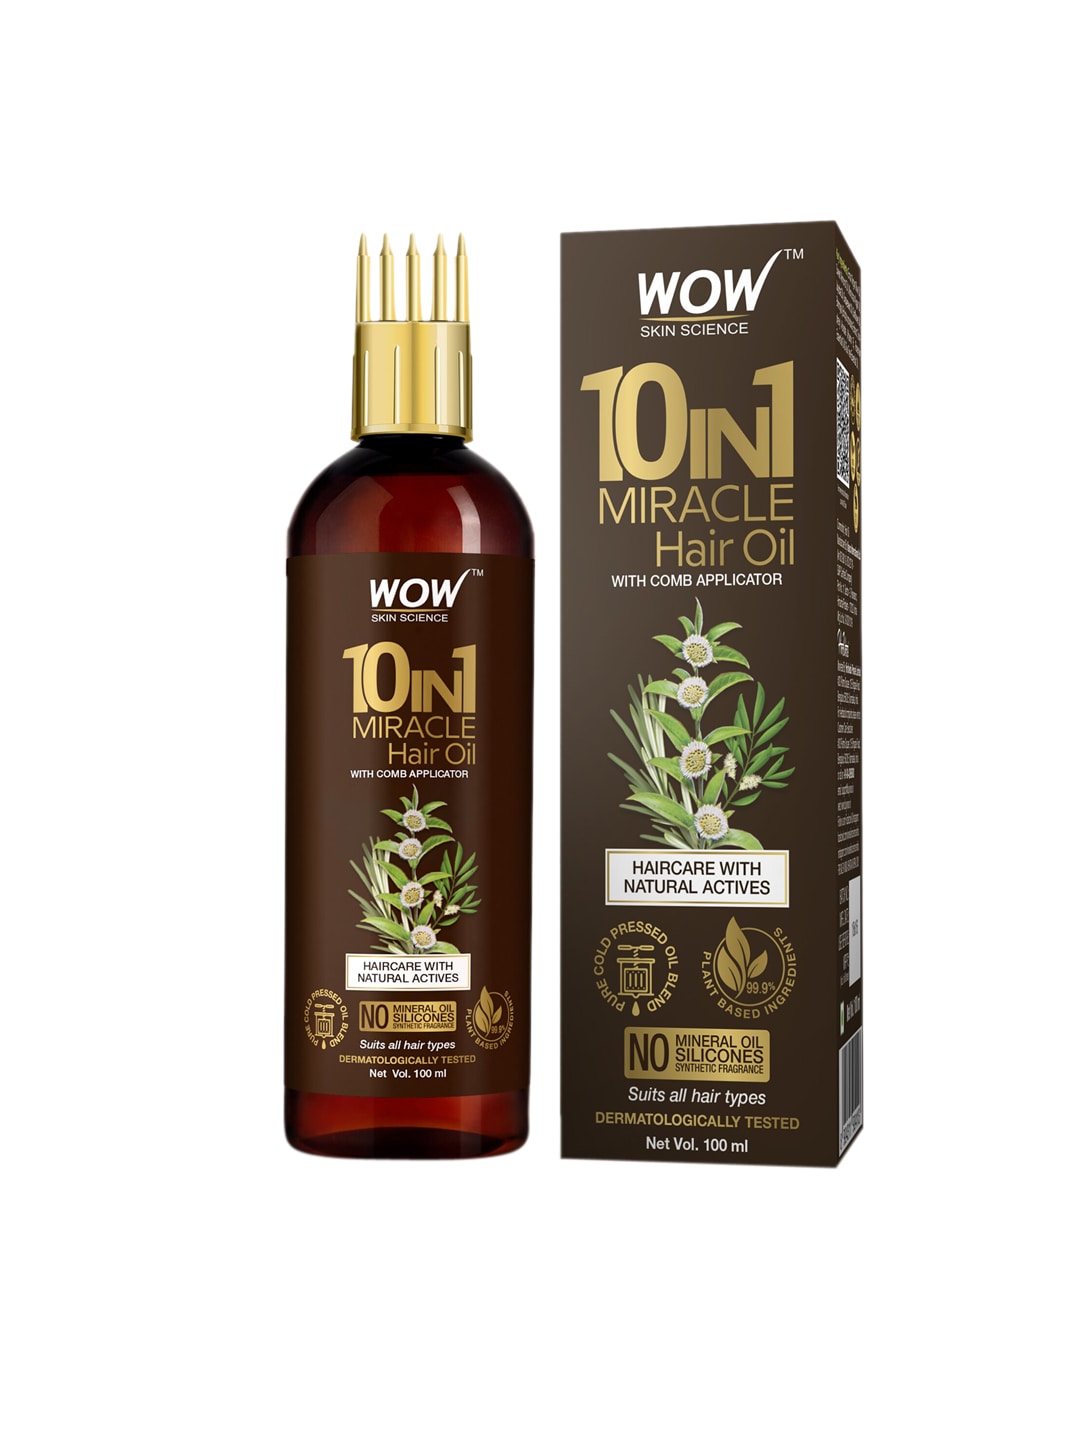 WOW SKIN SCIENCE 10 in 1 Miracle Hair Oil with Comb Applicator - 100 ml Price in India